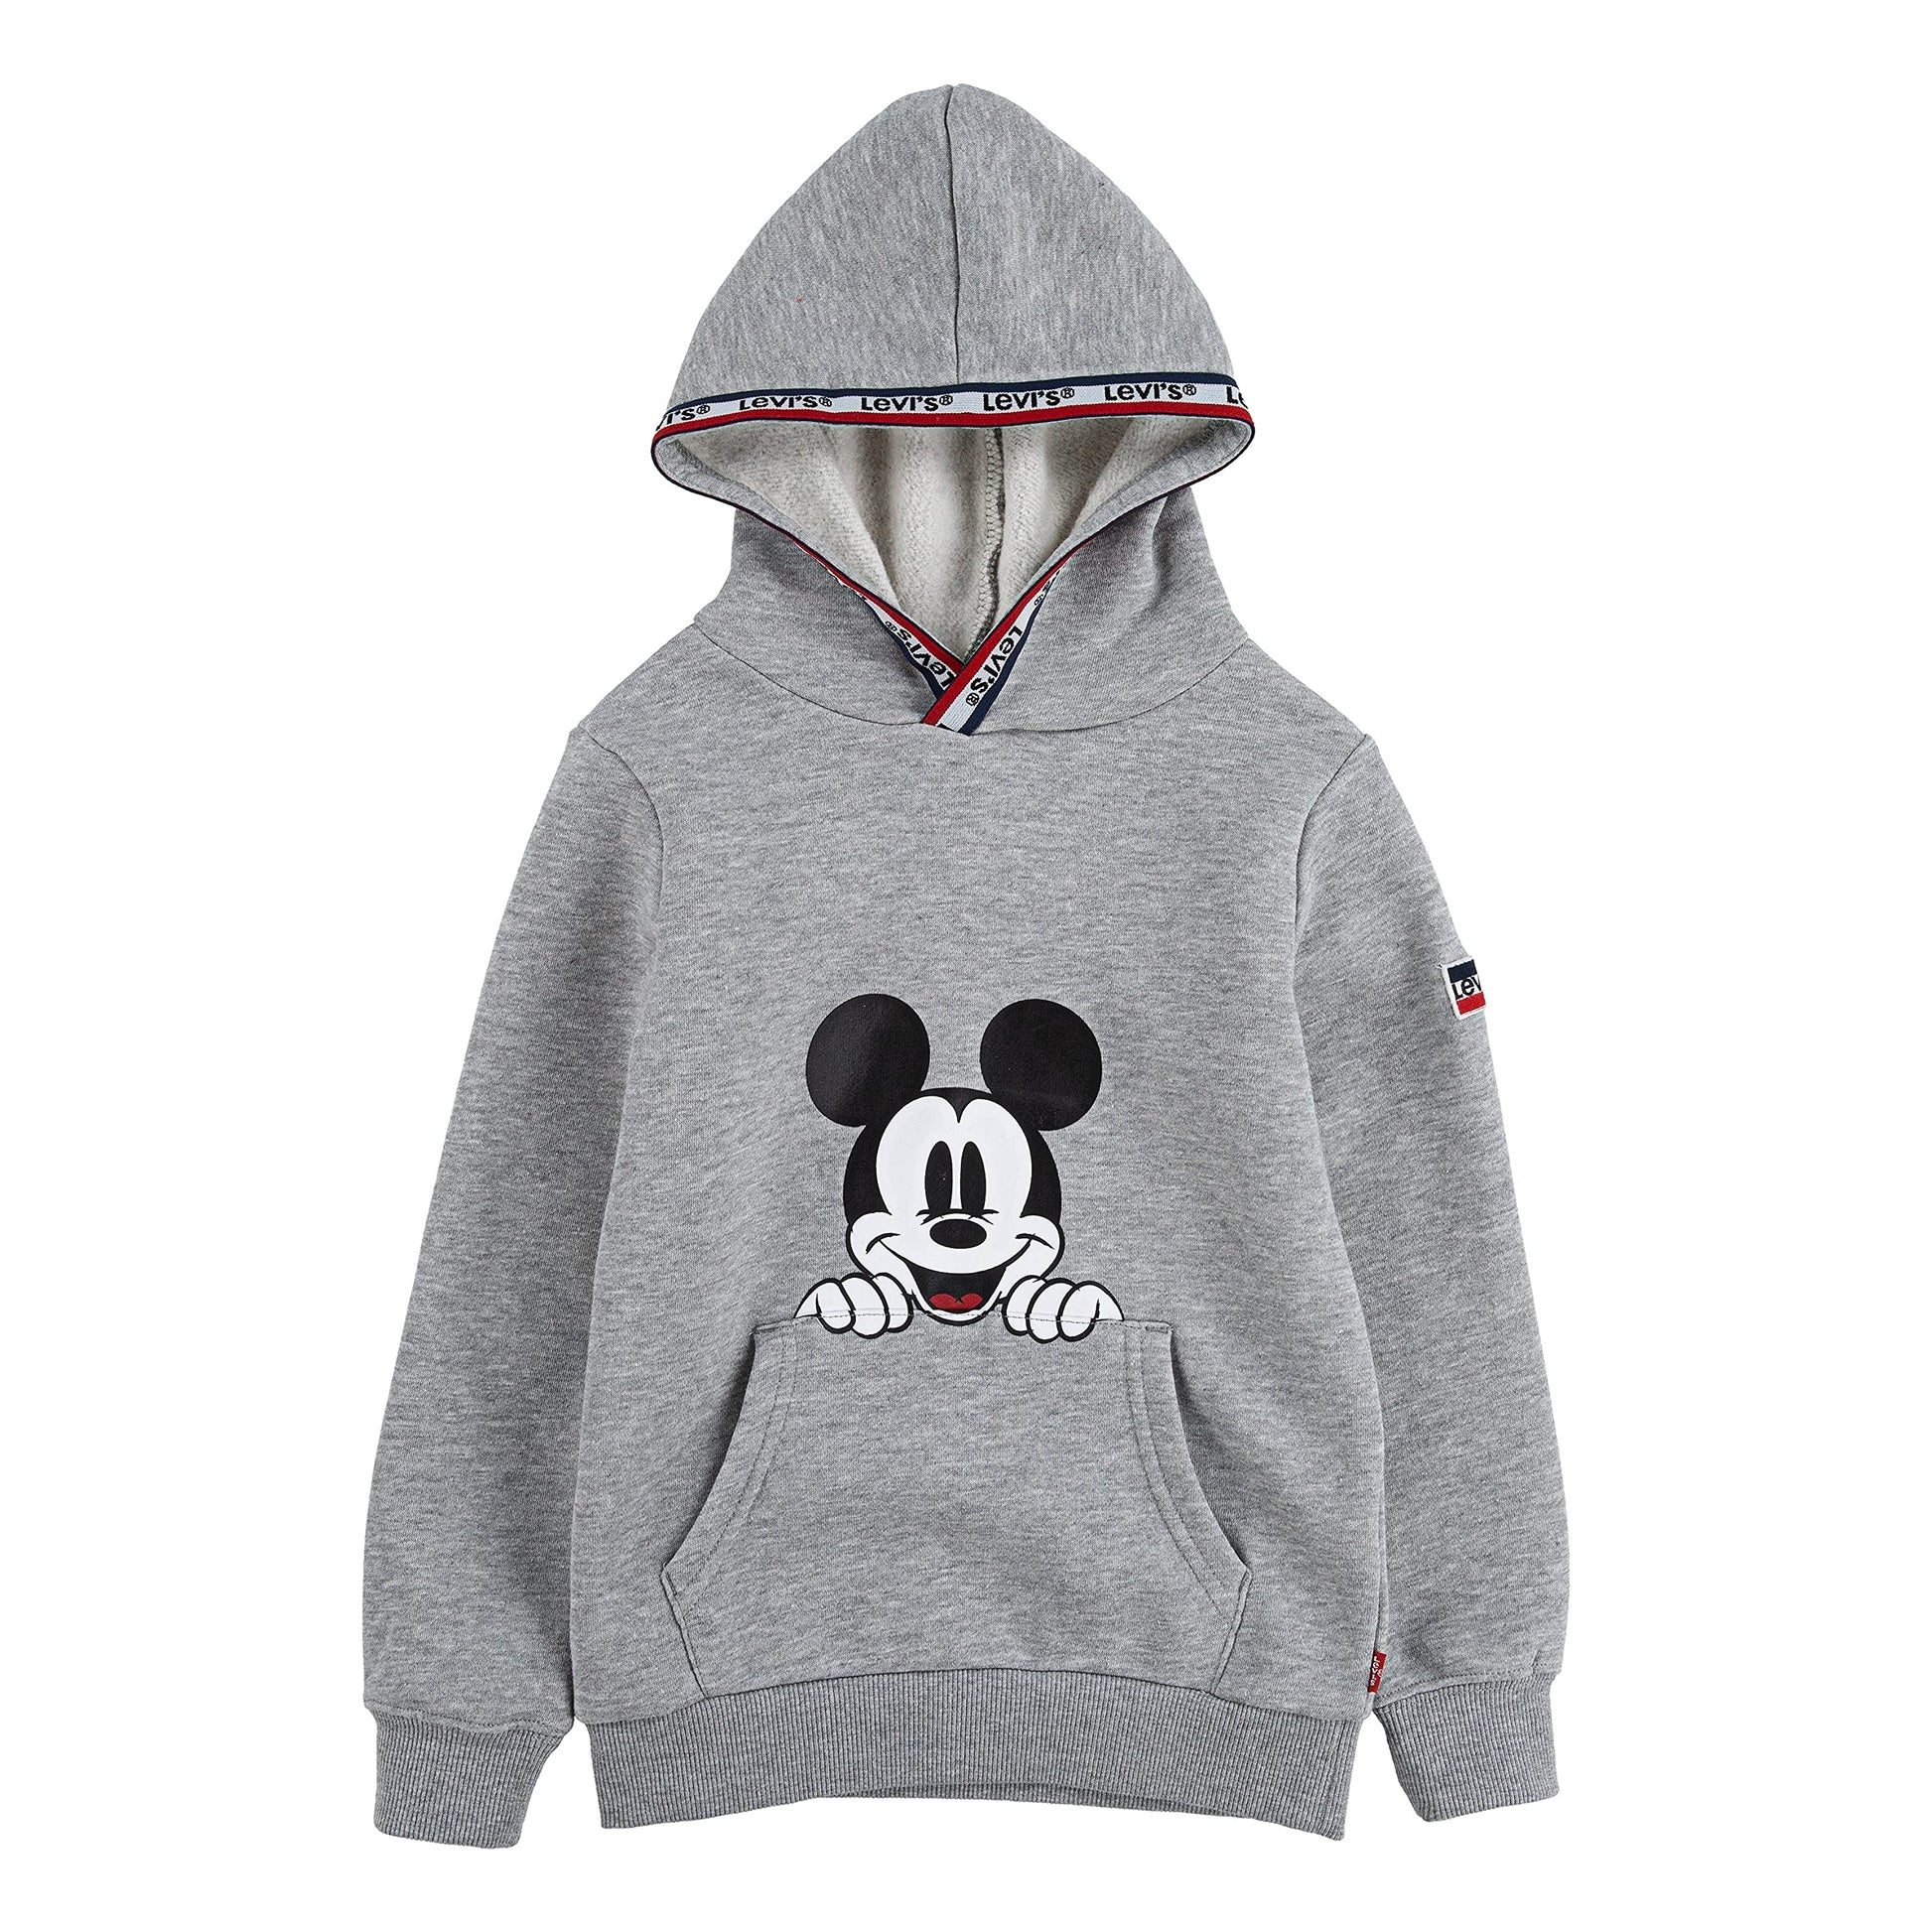 Image 1 of Levi's x Disney Mickey Mouse Hoodie (Little Kids)